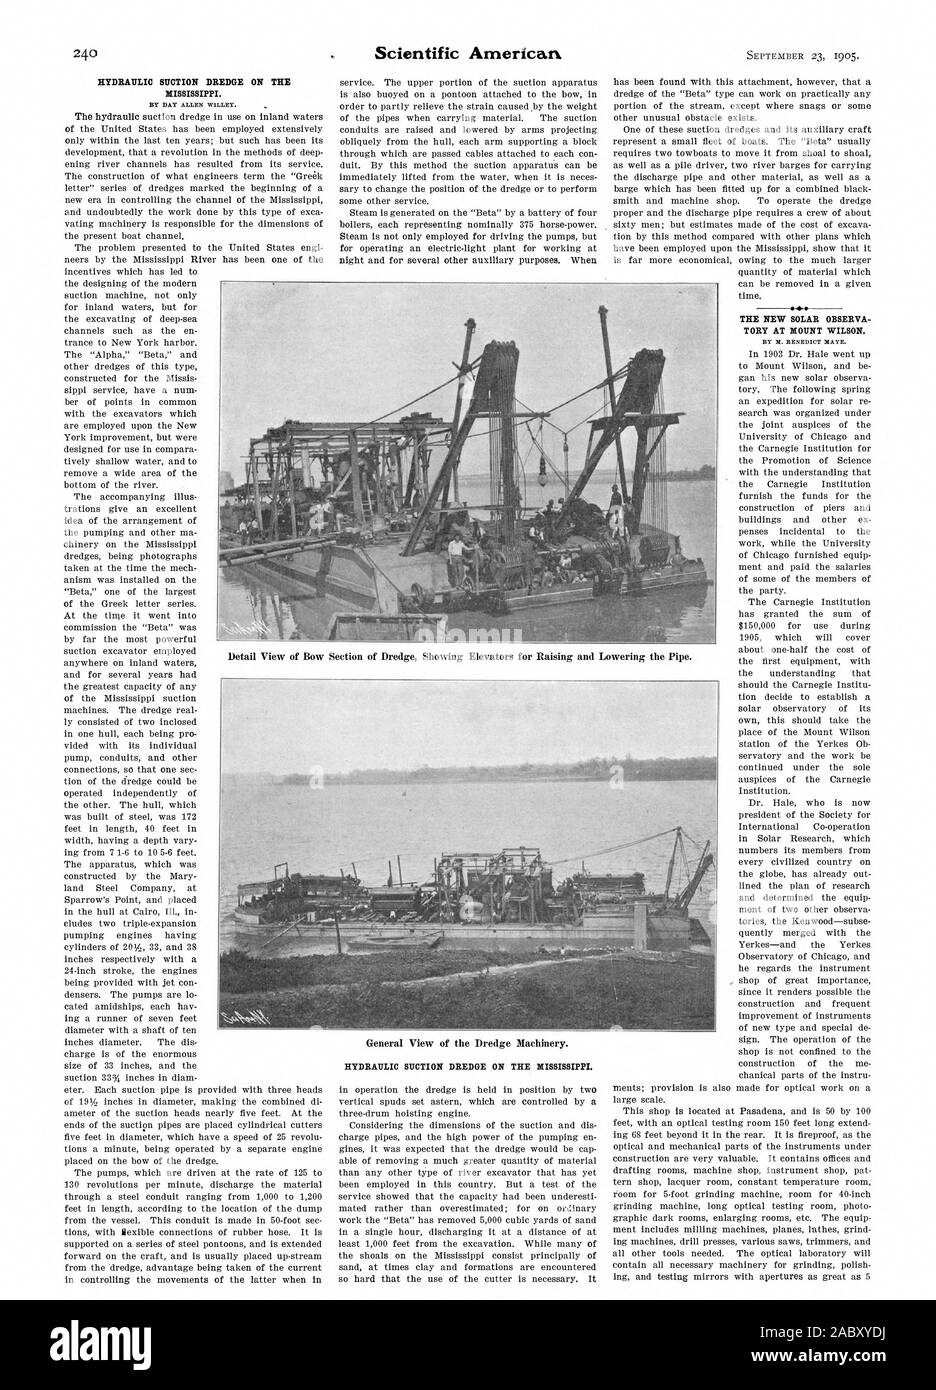 MISSISSIPPI. BY DAY ALLEN WILLEY. HYDRAULIC SUCTION DREDGE ON THE MISSISSIPPI. THE NEW SOLAR OBSERVA TORY AT MOUNT WILSON. BY N. BENEDICT BATE., scientific american, 1905-09-23 Stock Photo